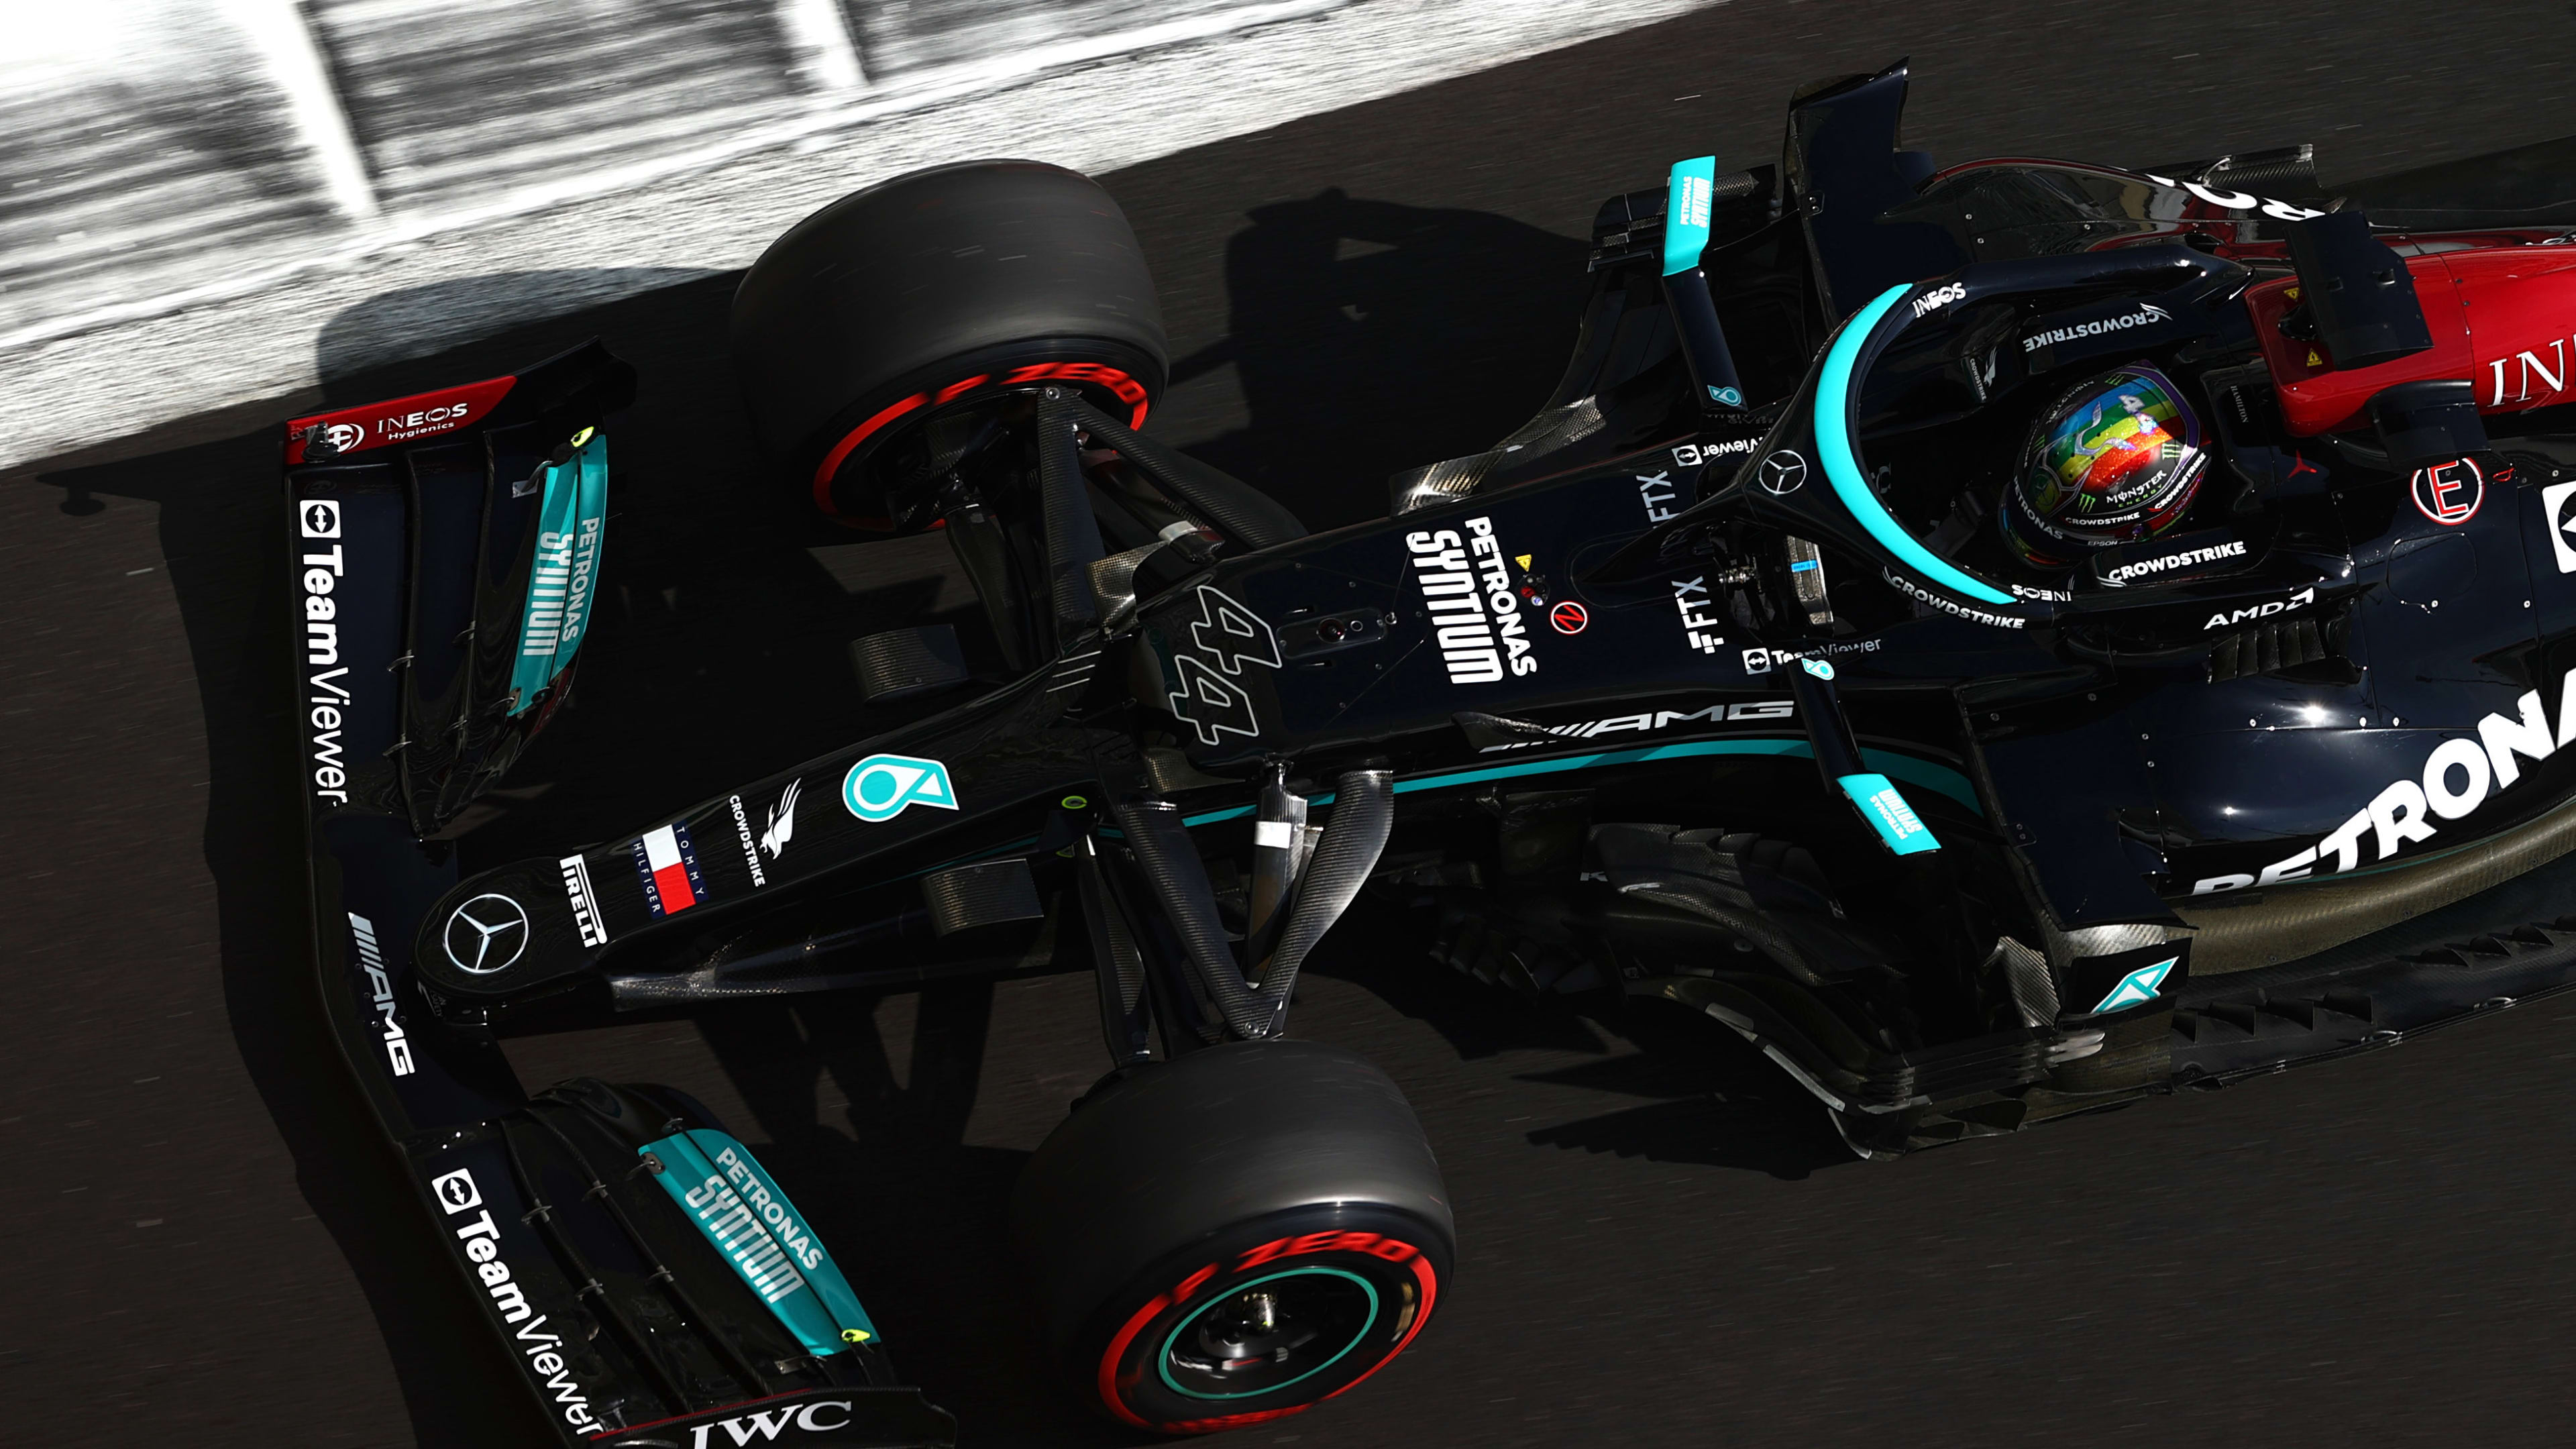 2021 Abu Dhabi Grand Prix FP2 report and highlights Hamilton leads Ocon and Bottas in second Yas Marina practice session while Verstappen takes P4 Formula 1®